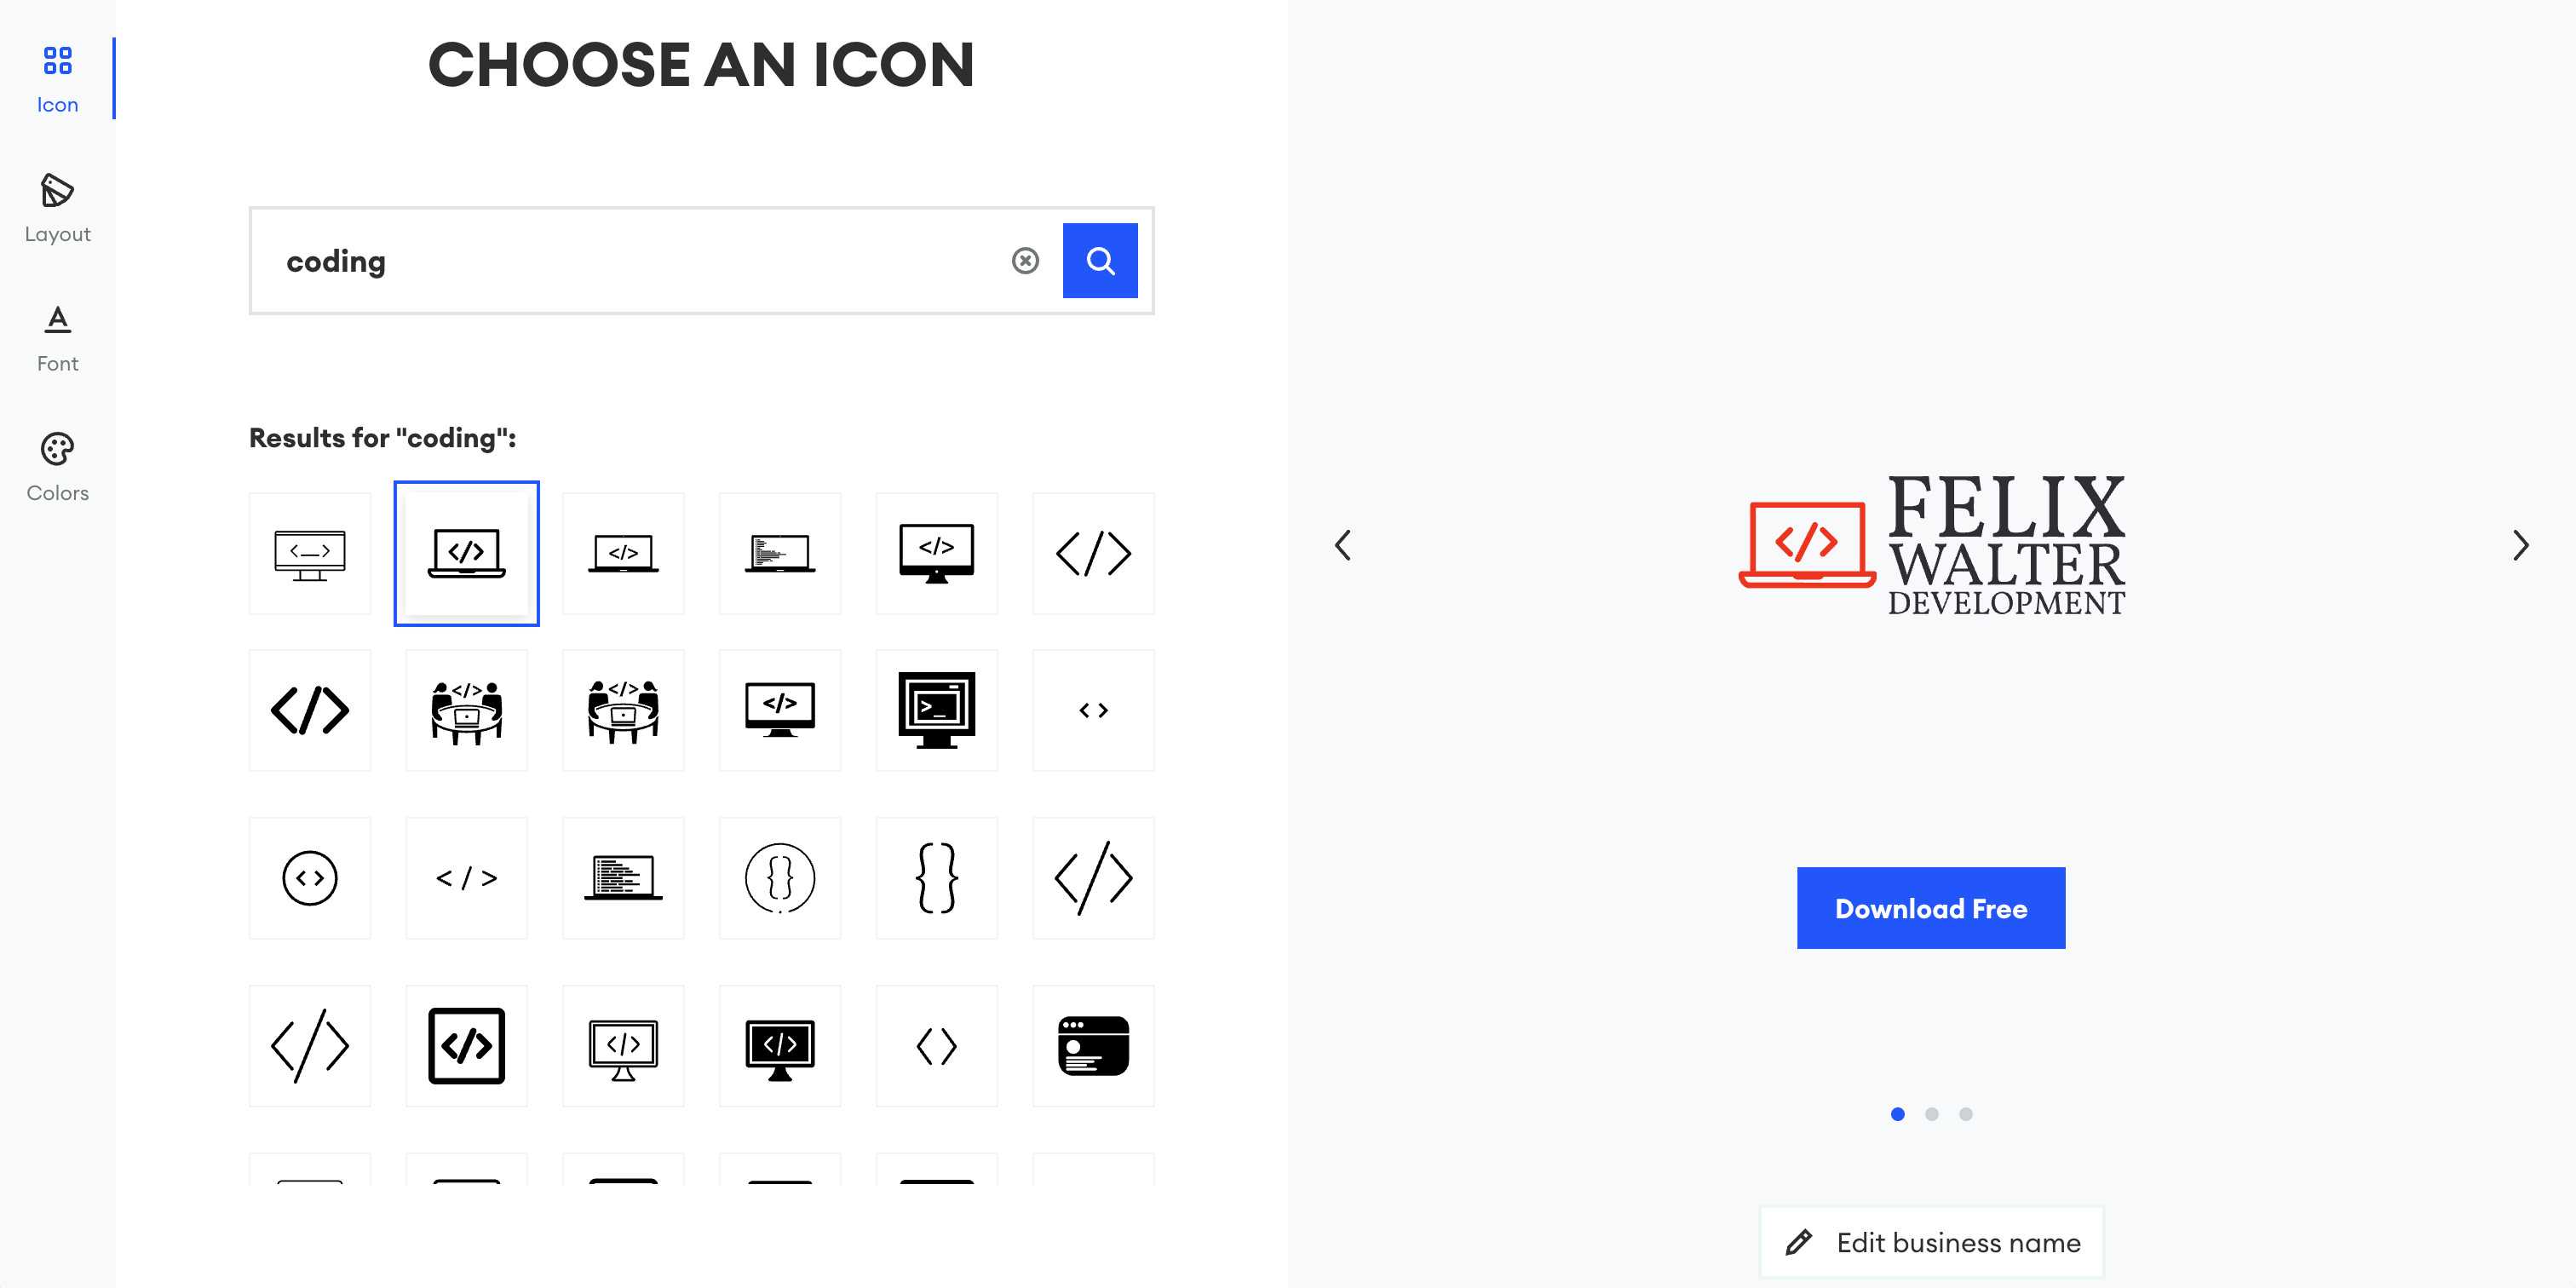 Icon suggestions based on user input